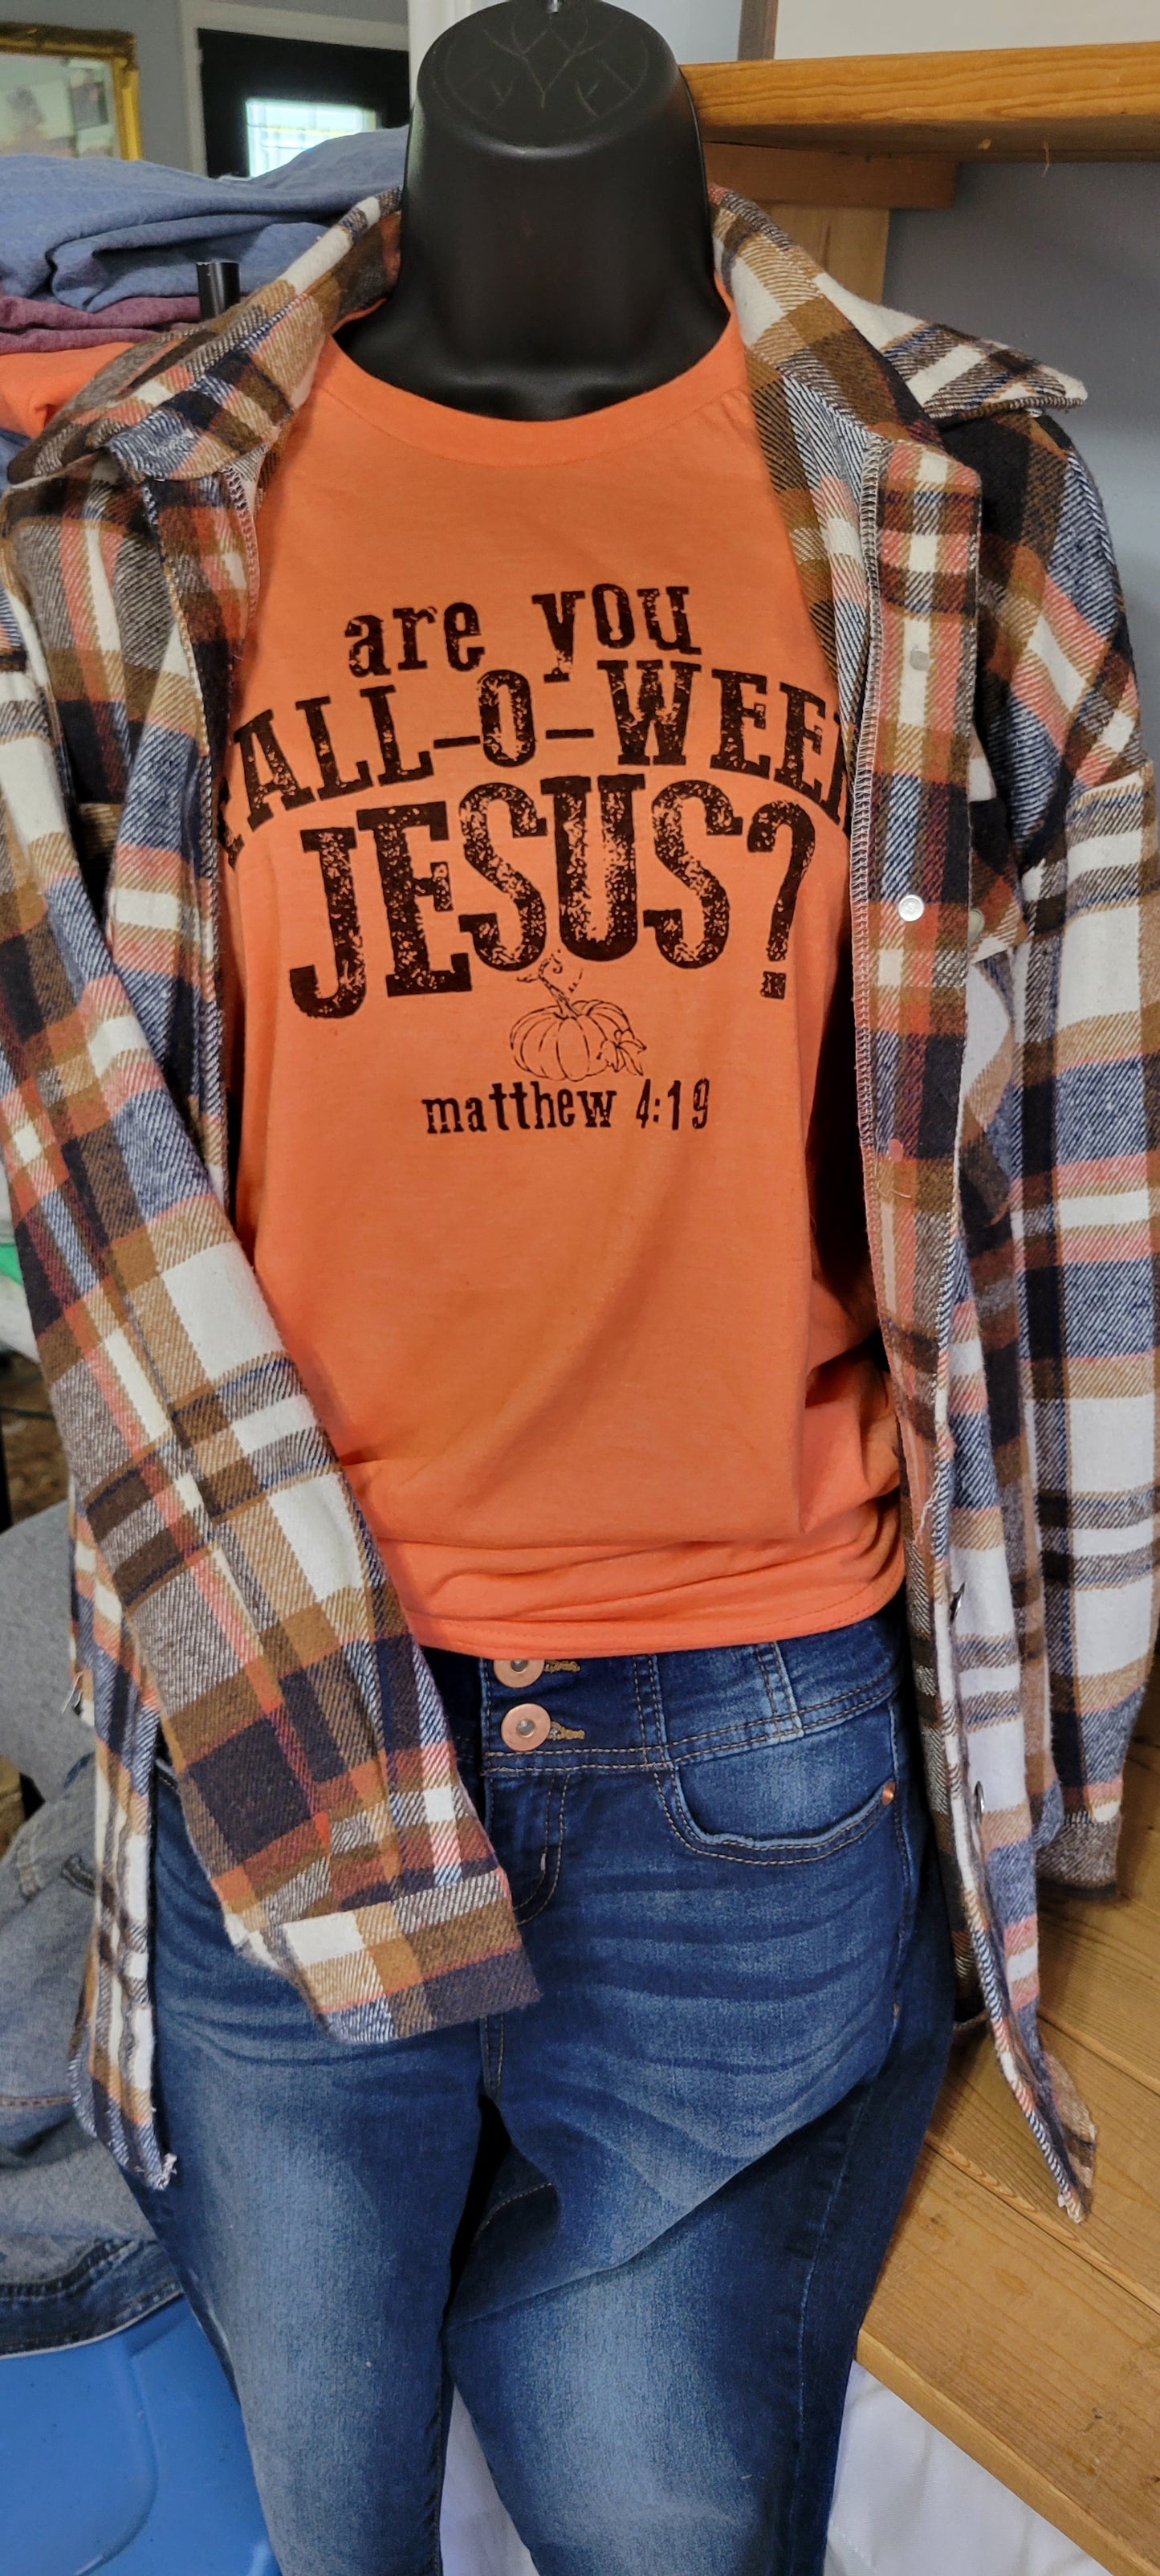 Are you Fall-o-ween Jesus t shirt